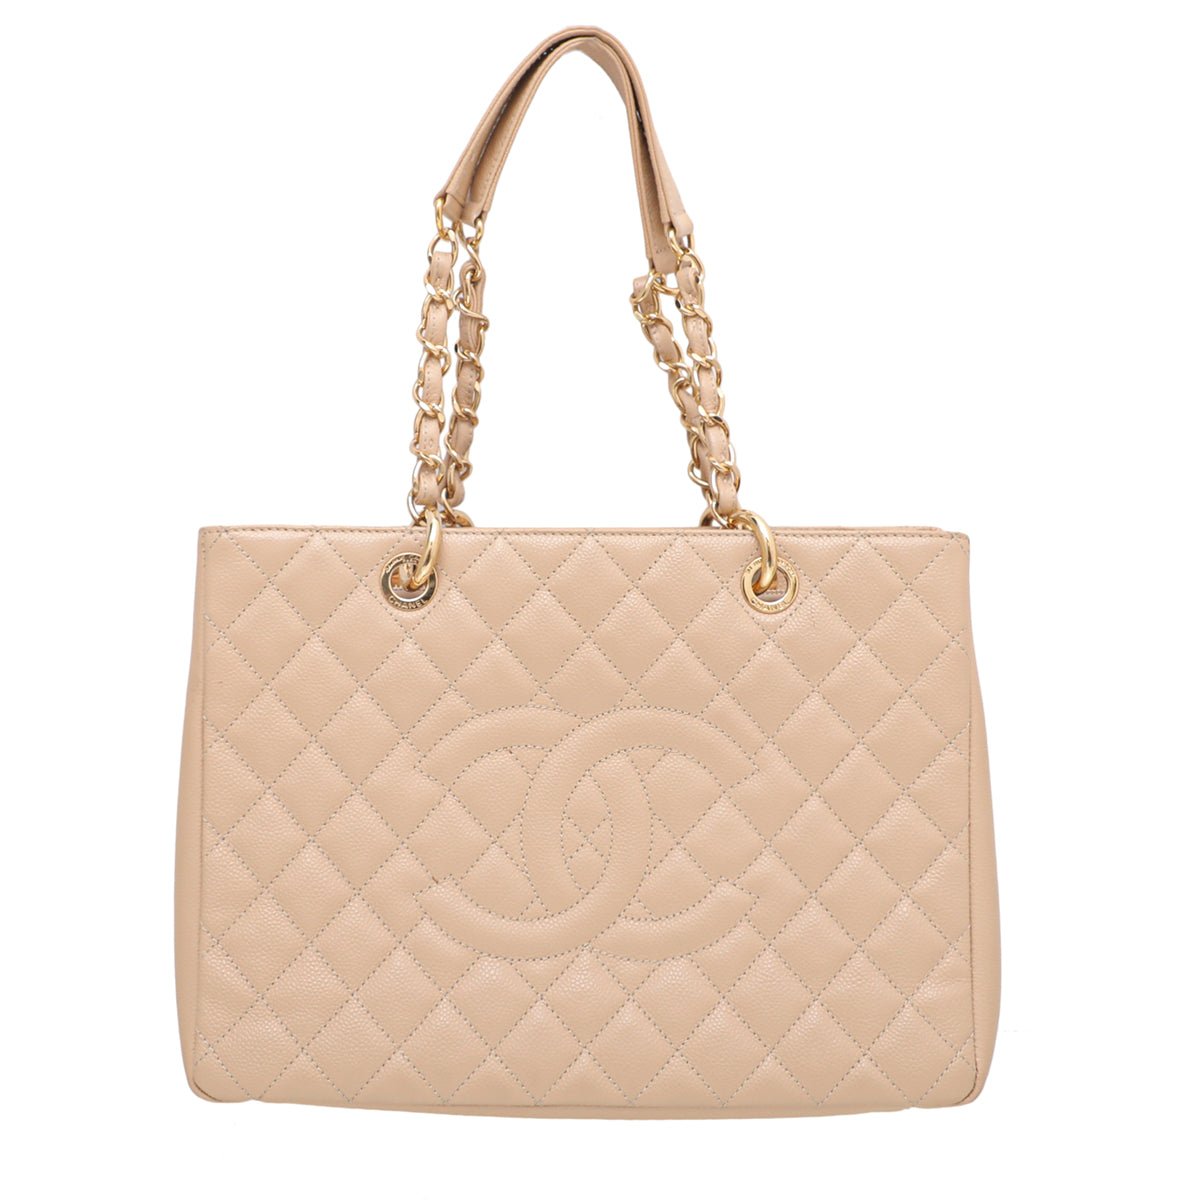 Chanel Beige Grand Shopping Tote Bag – The Closet